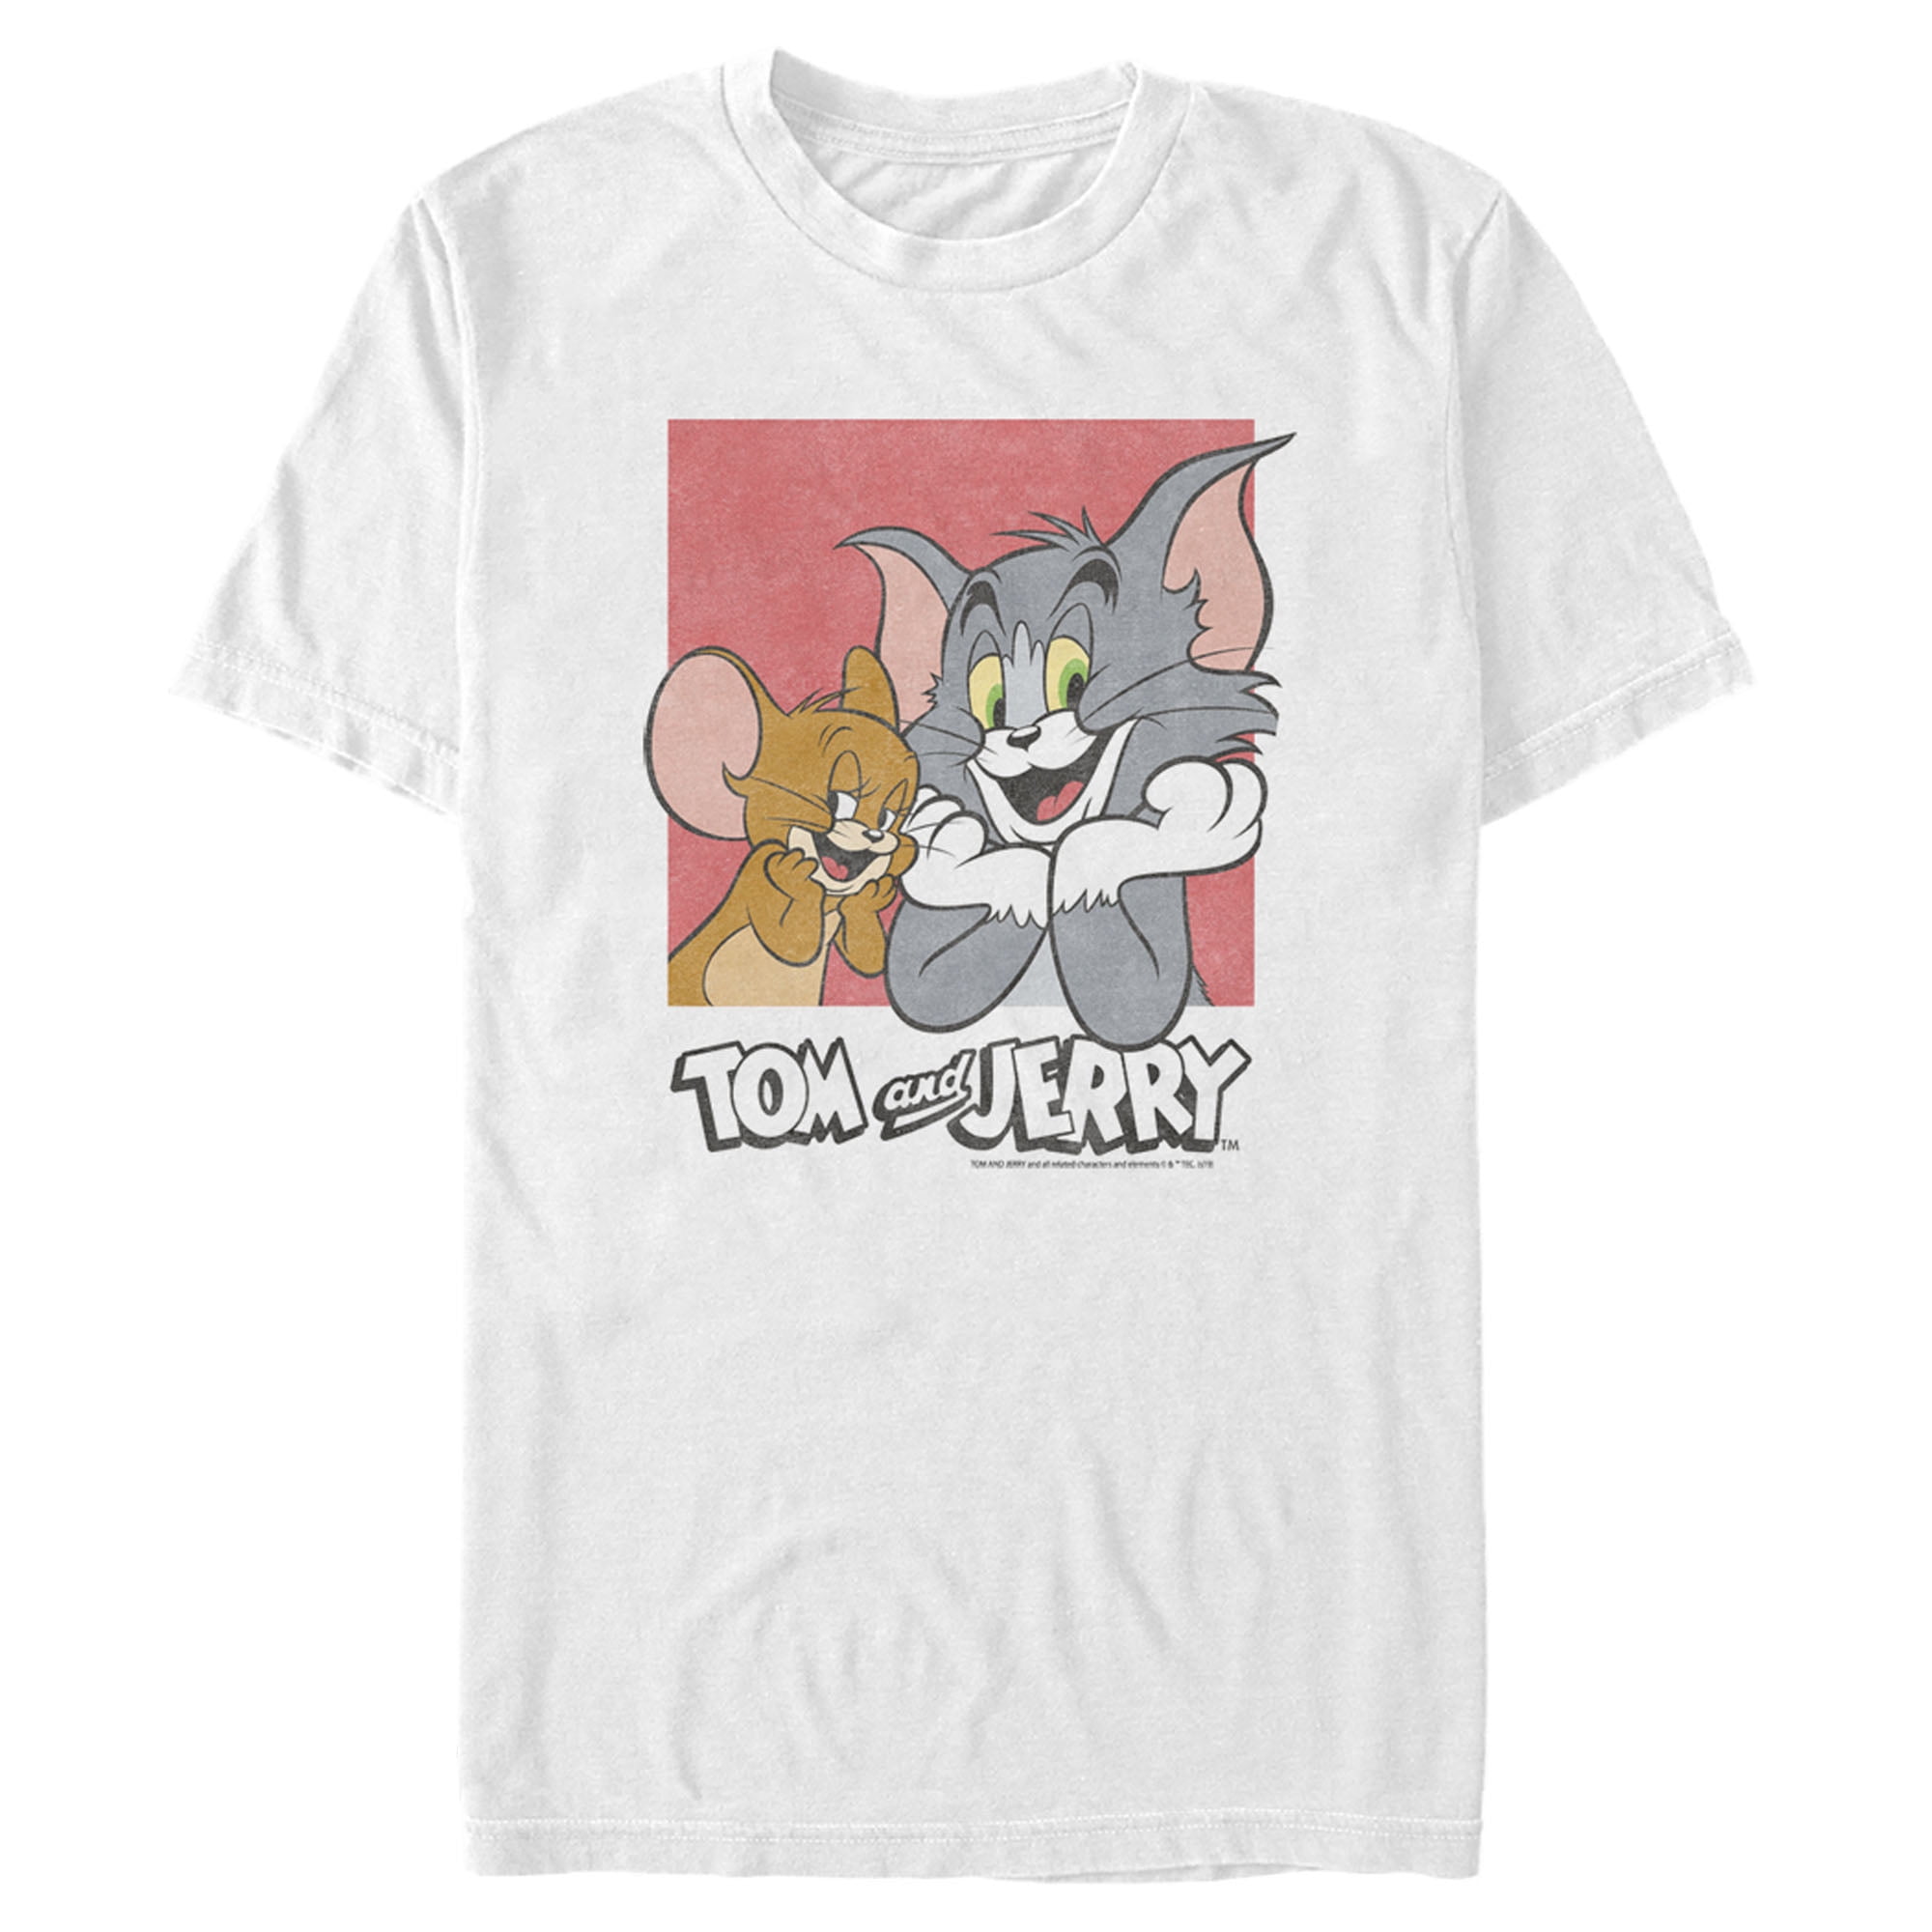 Tom cat and Jerry mouse Newborn Baby T-shirt Infant Clothes Toddler Graphic Tee 